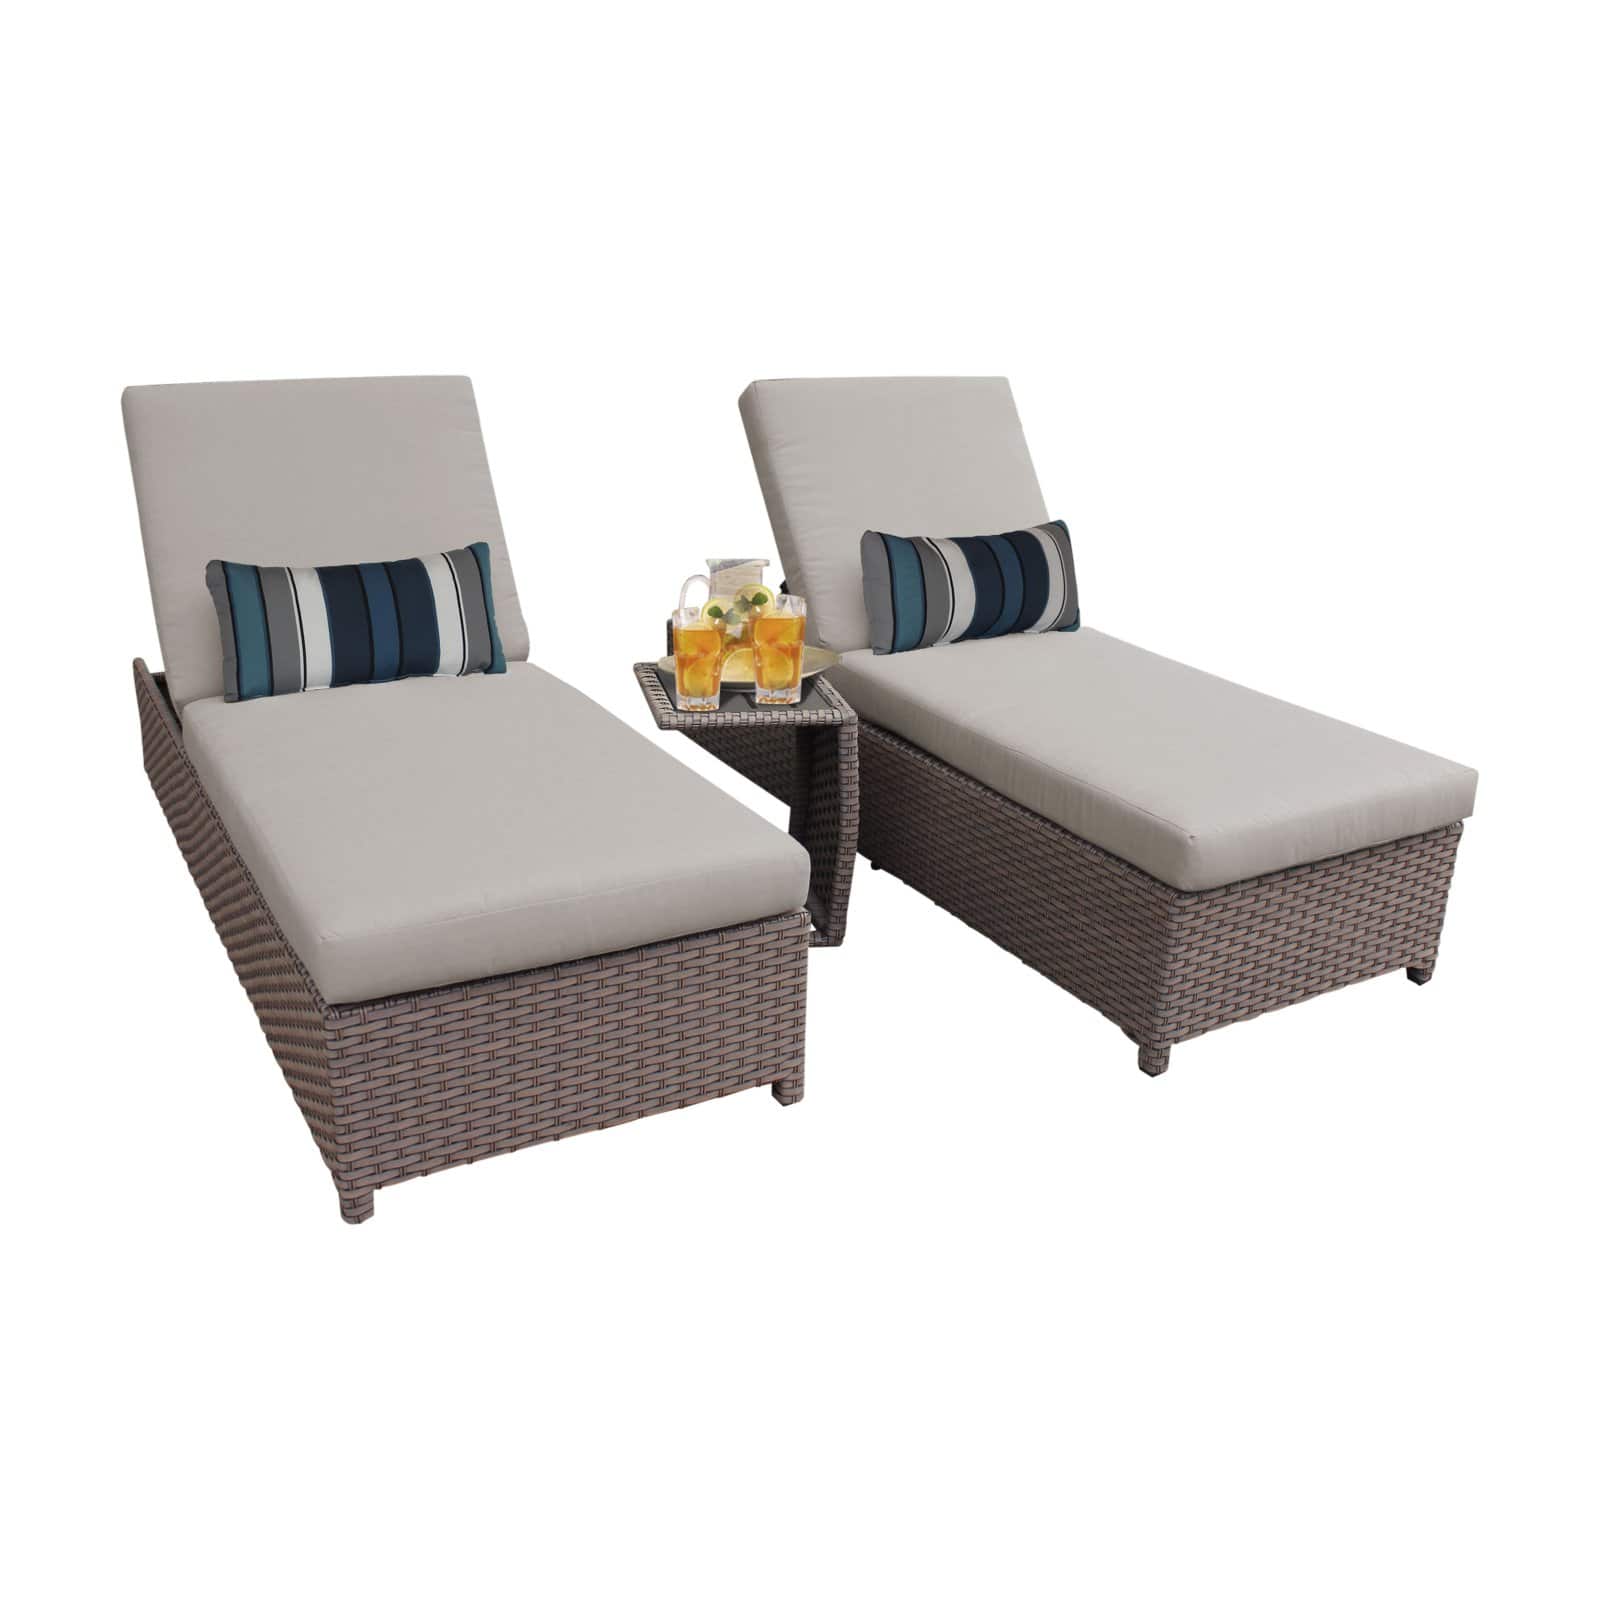 TK Classics Florence 3 Piece Wheeled Wicker Outdoor Chaise Lounge Set - image 2 of 11